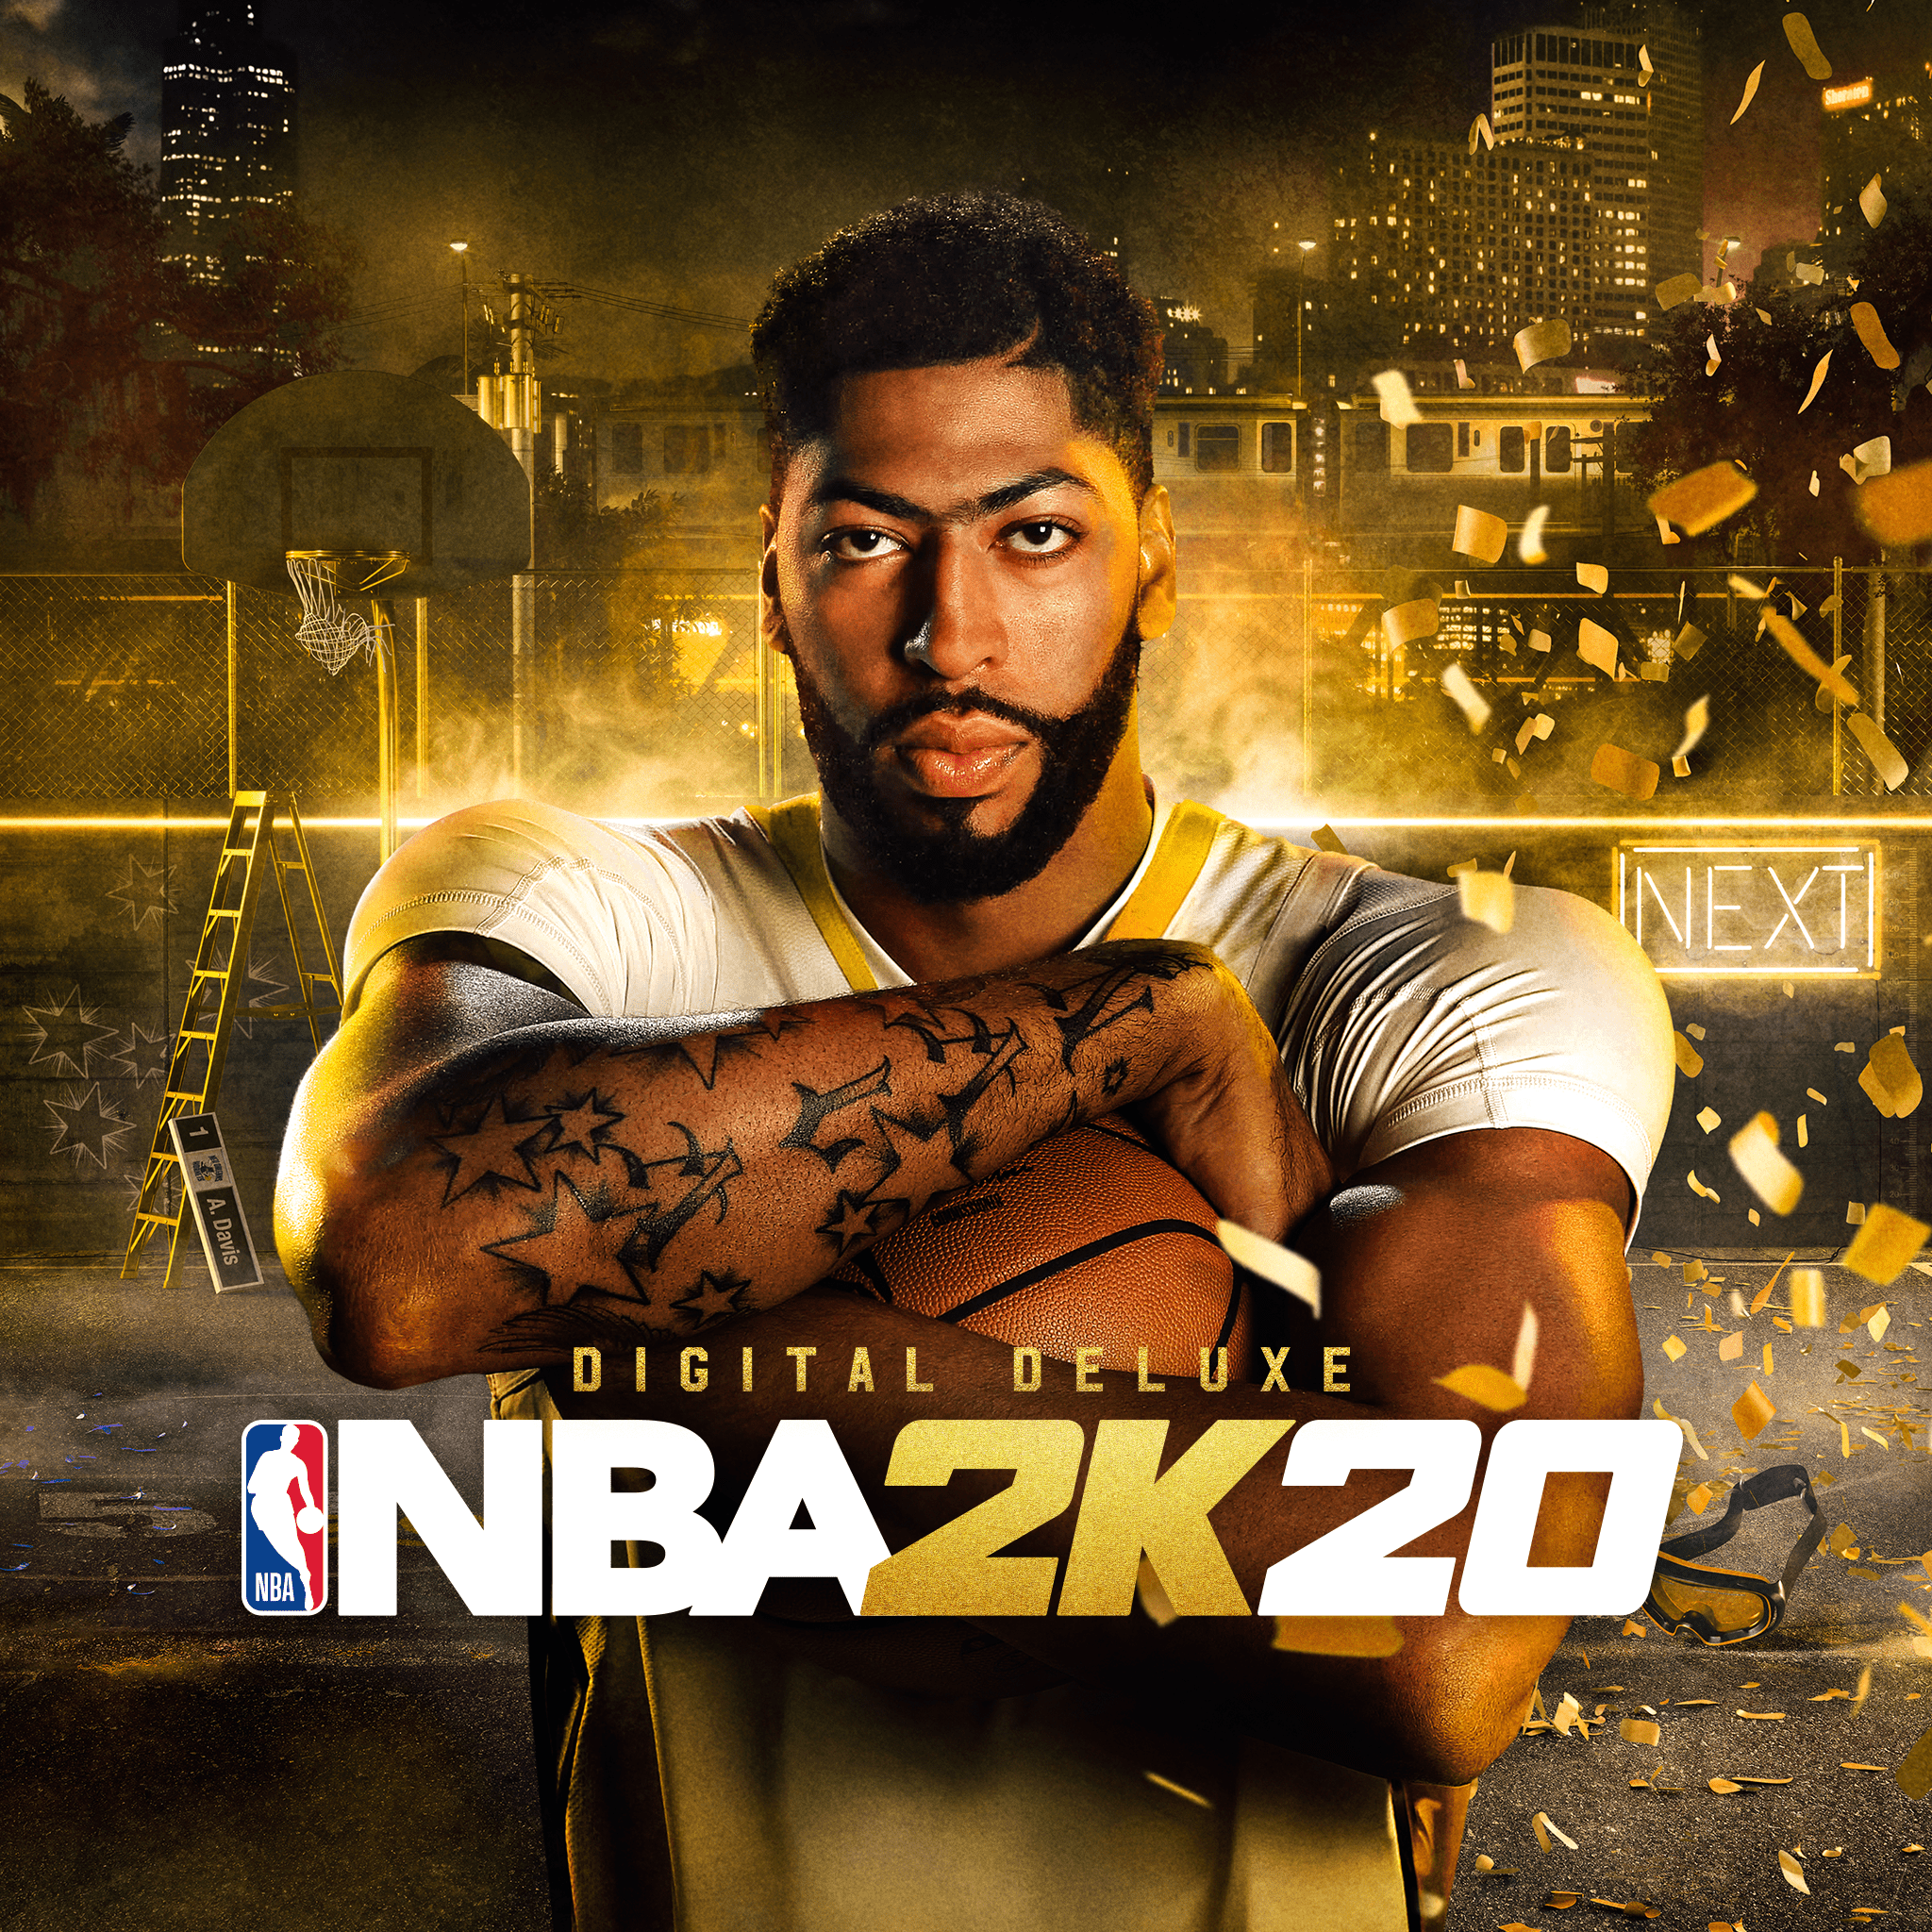 NBA 2K20 Digital Deluxe PS4 Price & Sale History PS Store USA